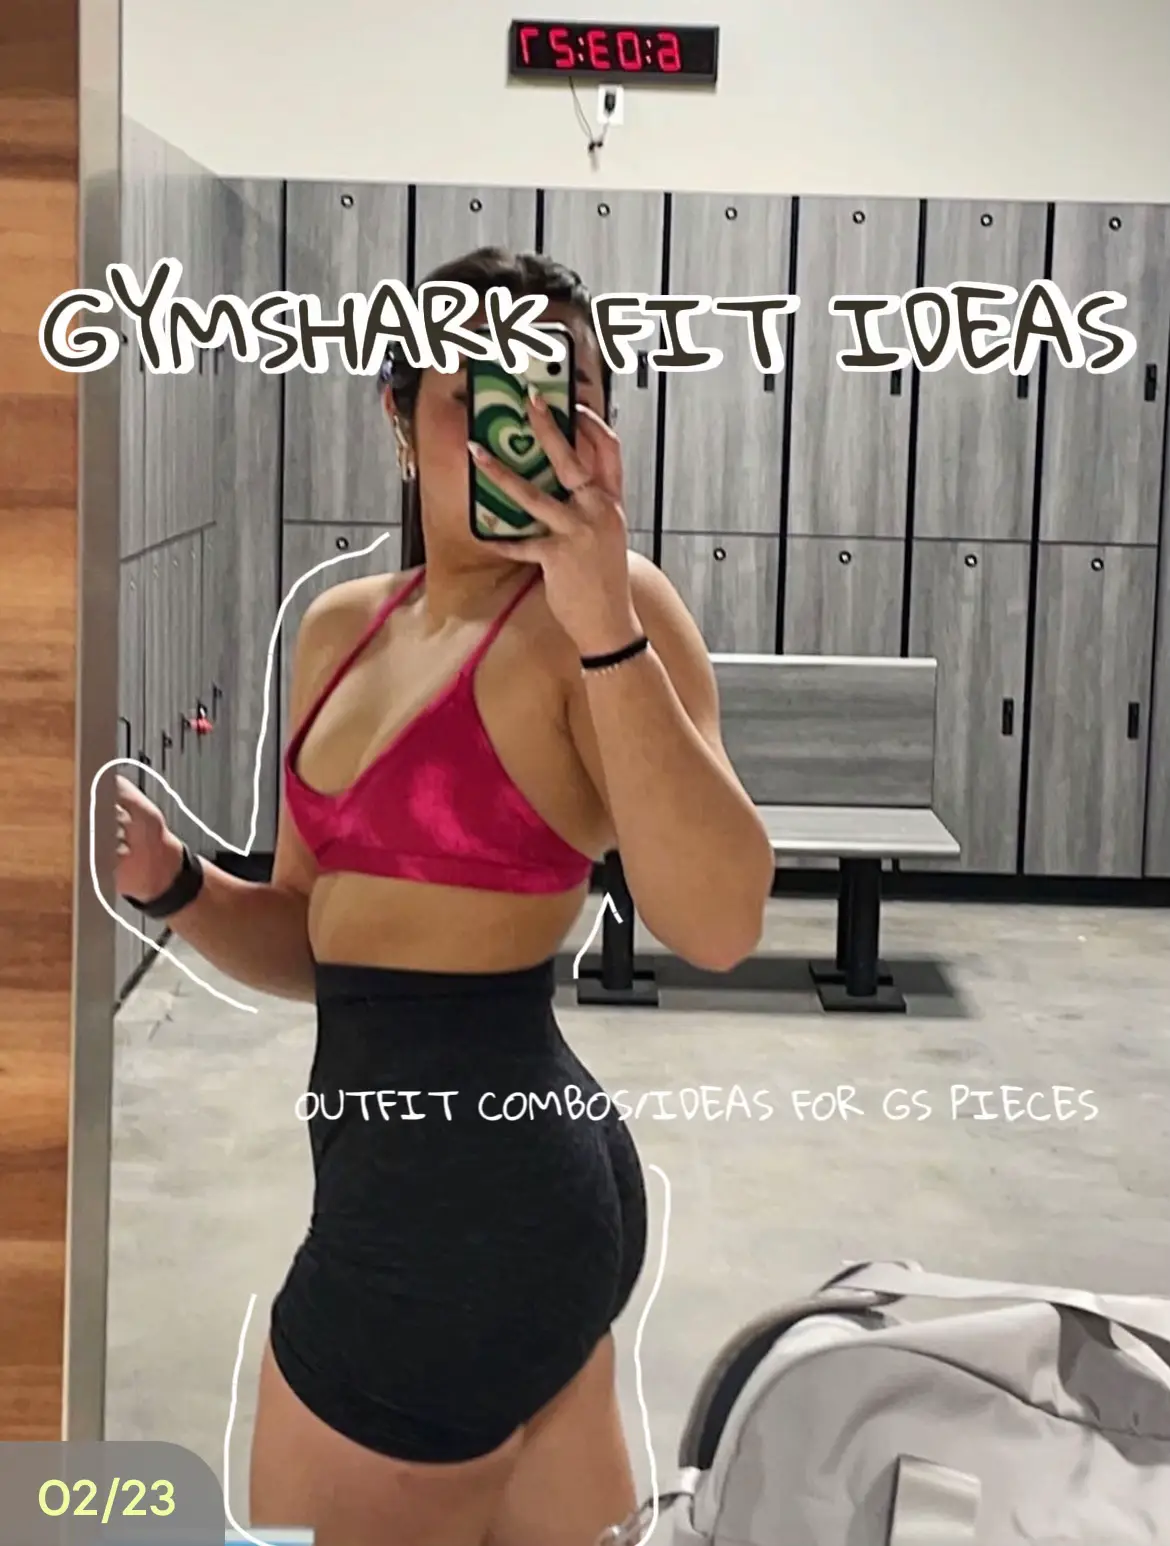 Gymshark - Flex on 'em💪 Which Gymshark outfit do you feel the